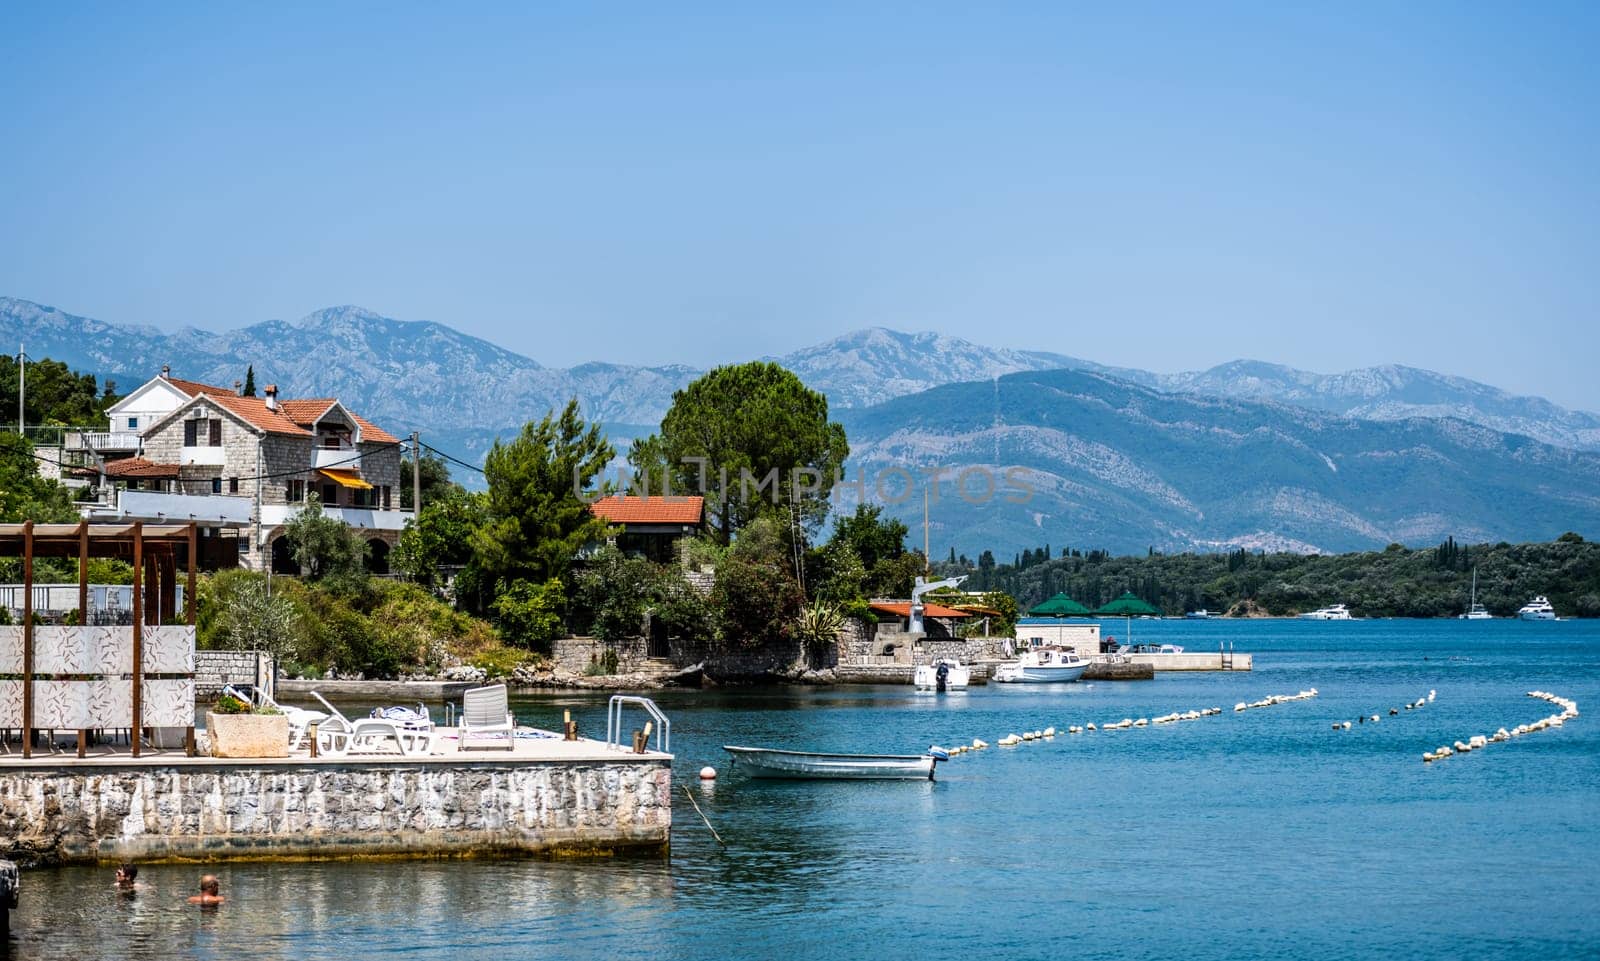 Beautiful Mediterranean architecture in Montenegro from Adriatic sea view. Scenic town with mountains on background